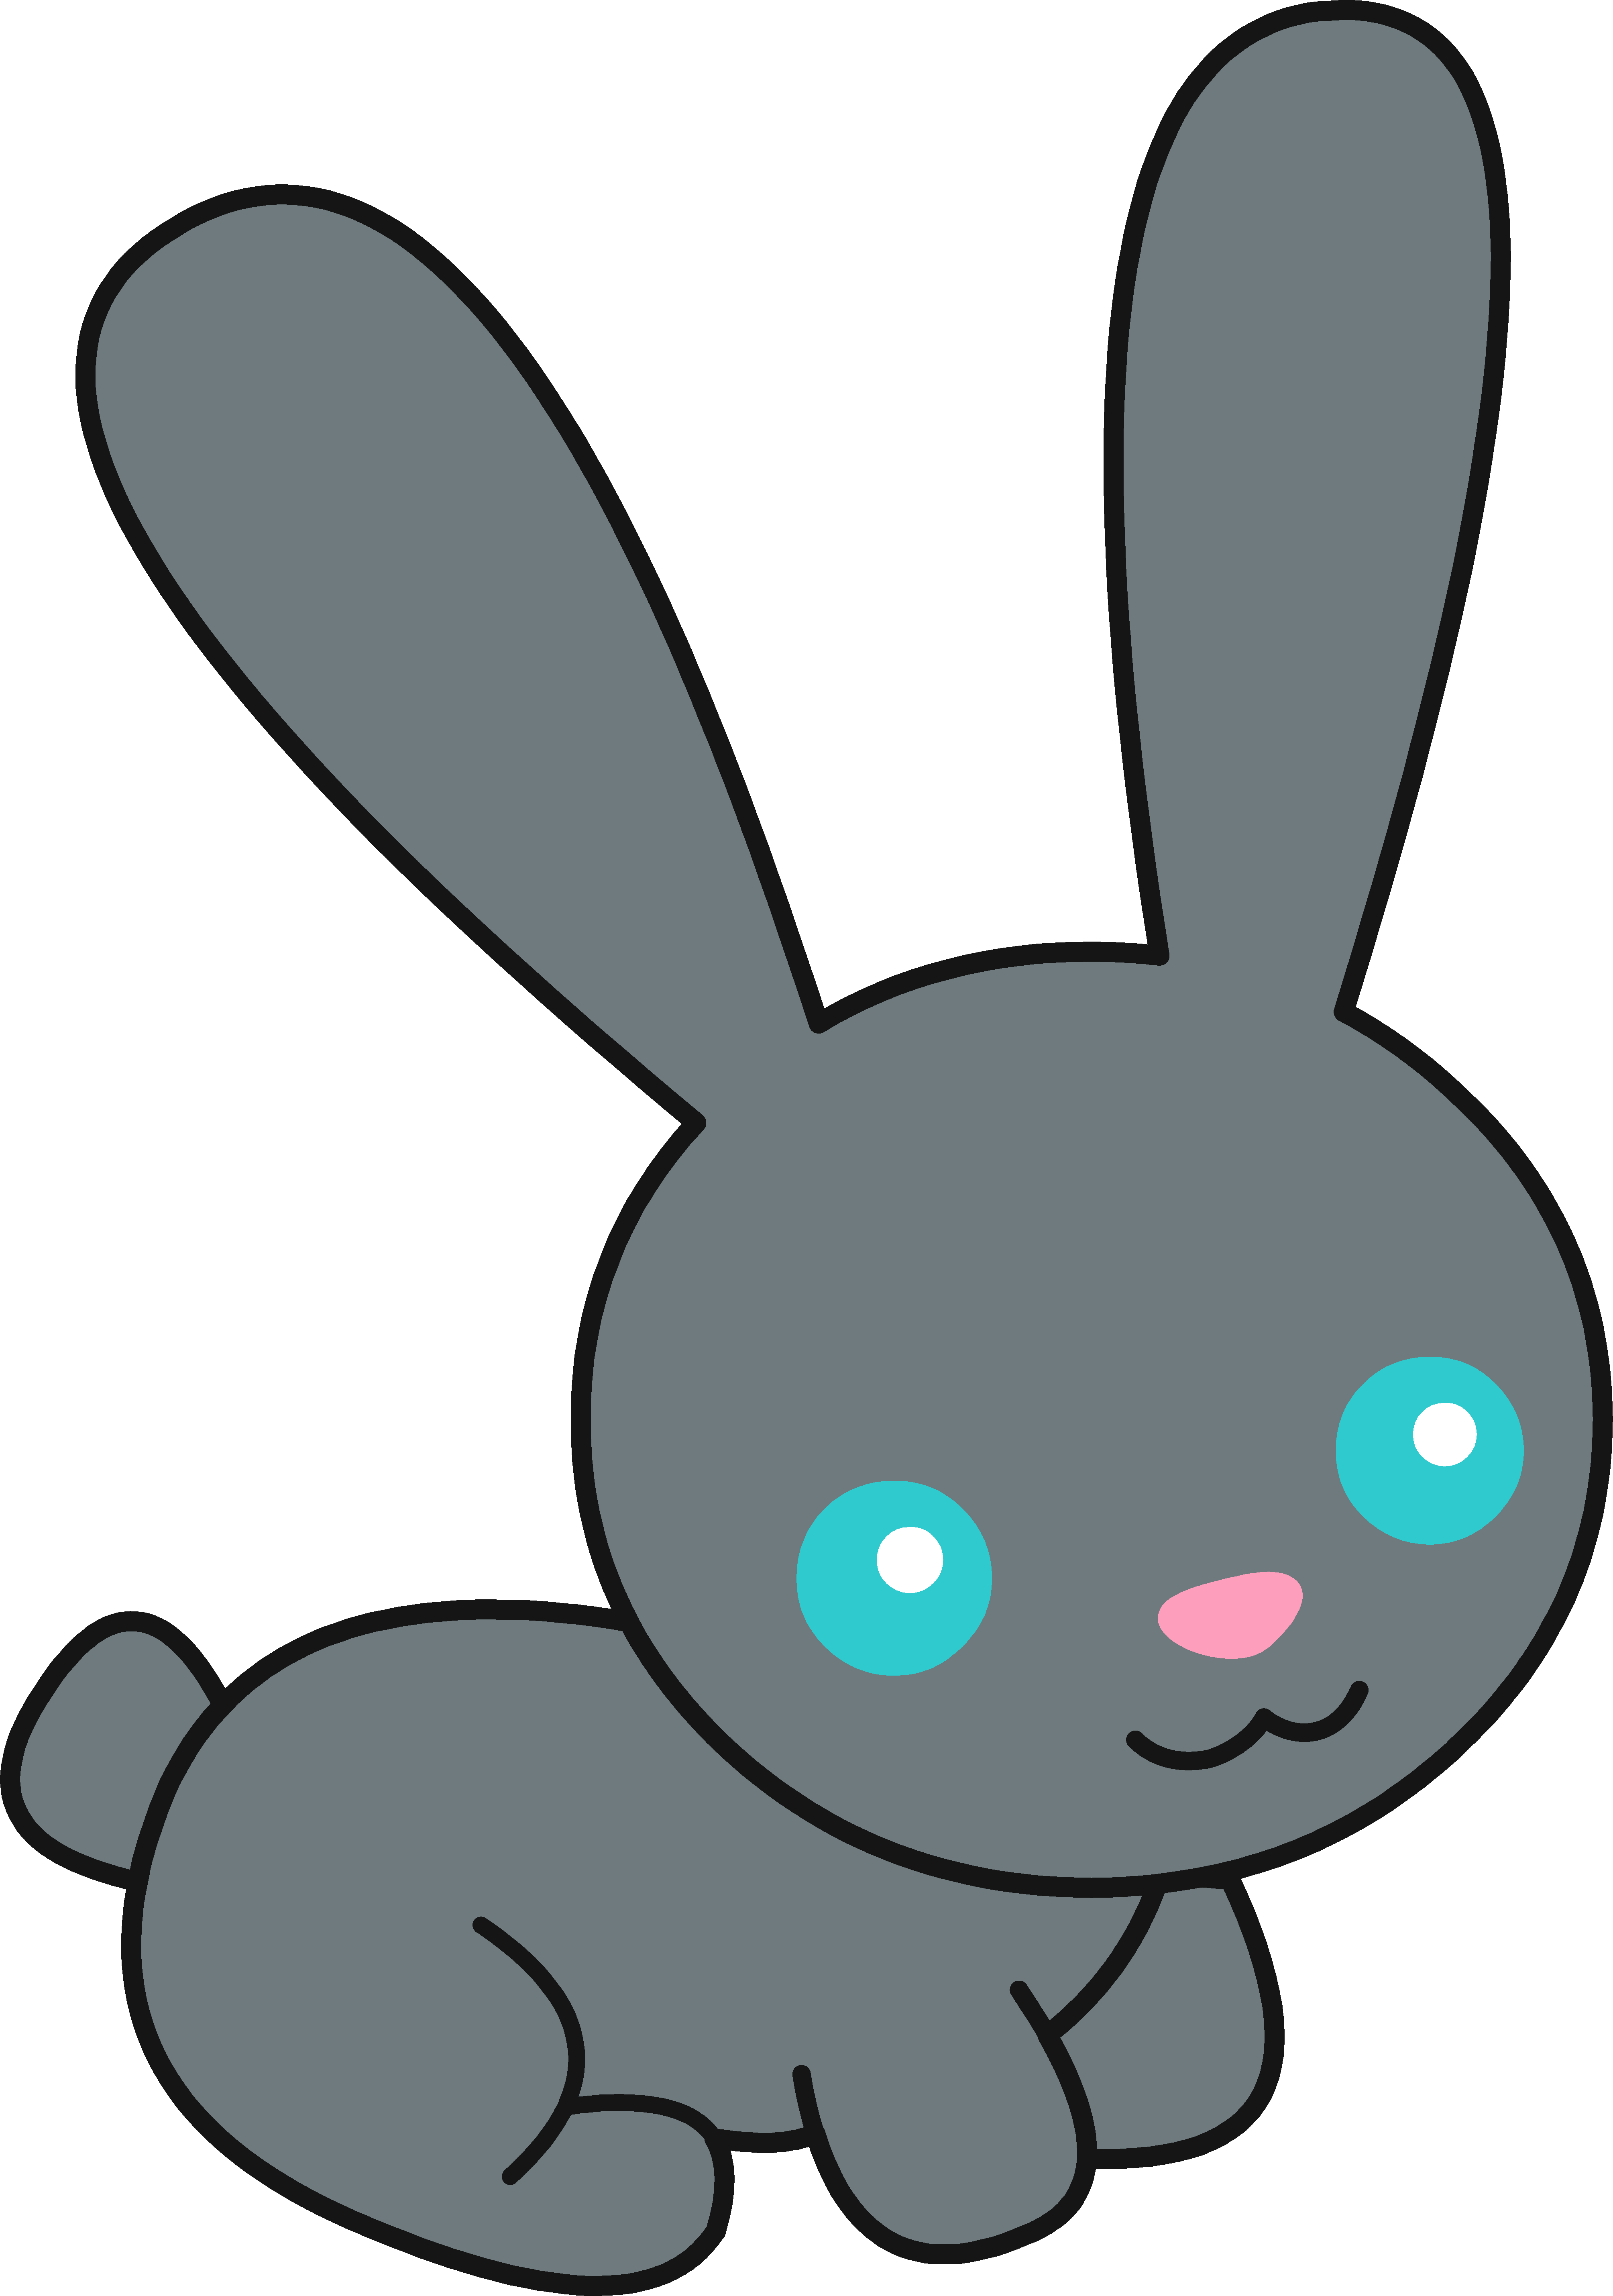 Mouth clipart bunny. Feeding cliparts free collection